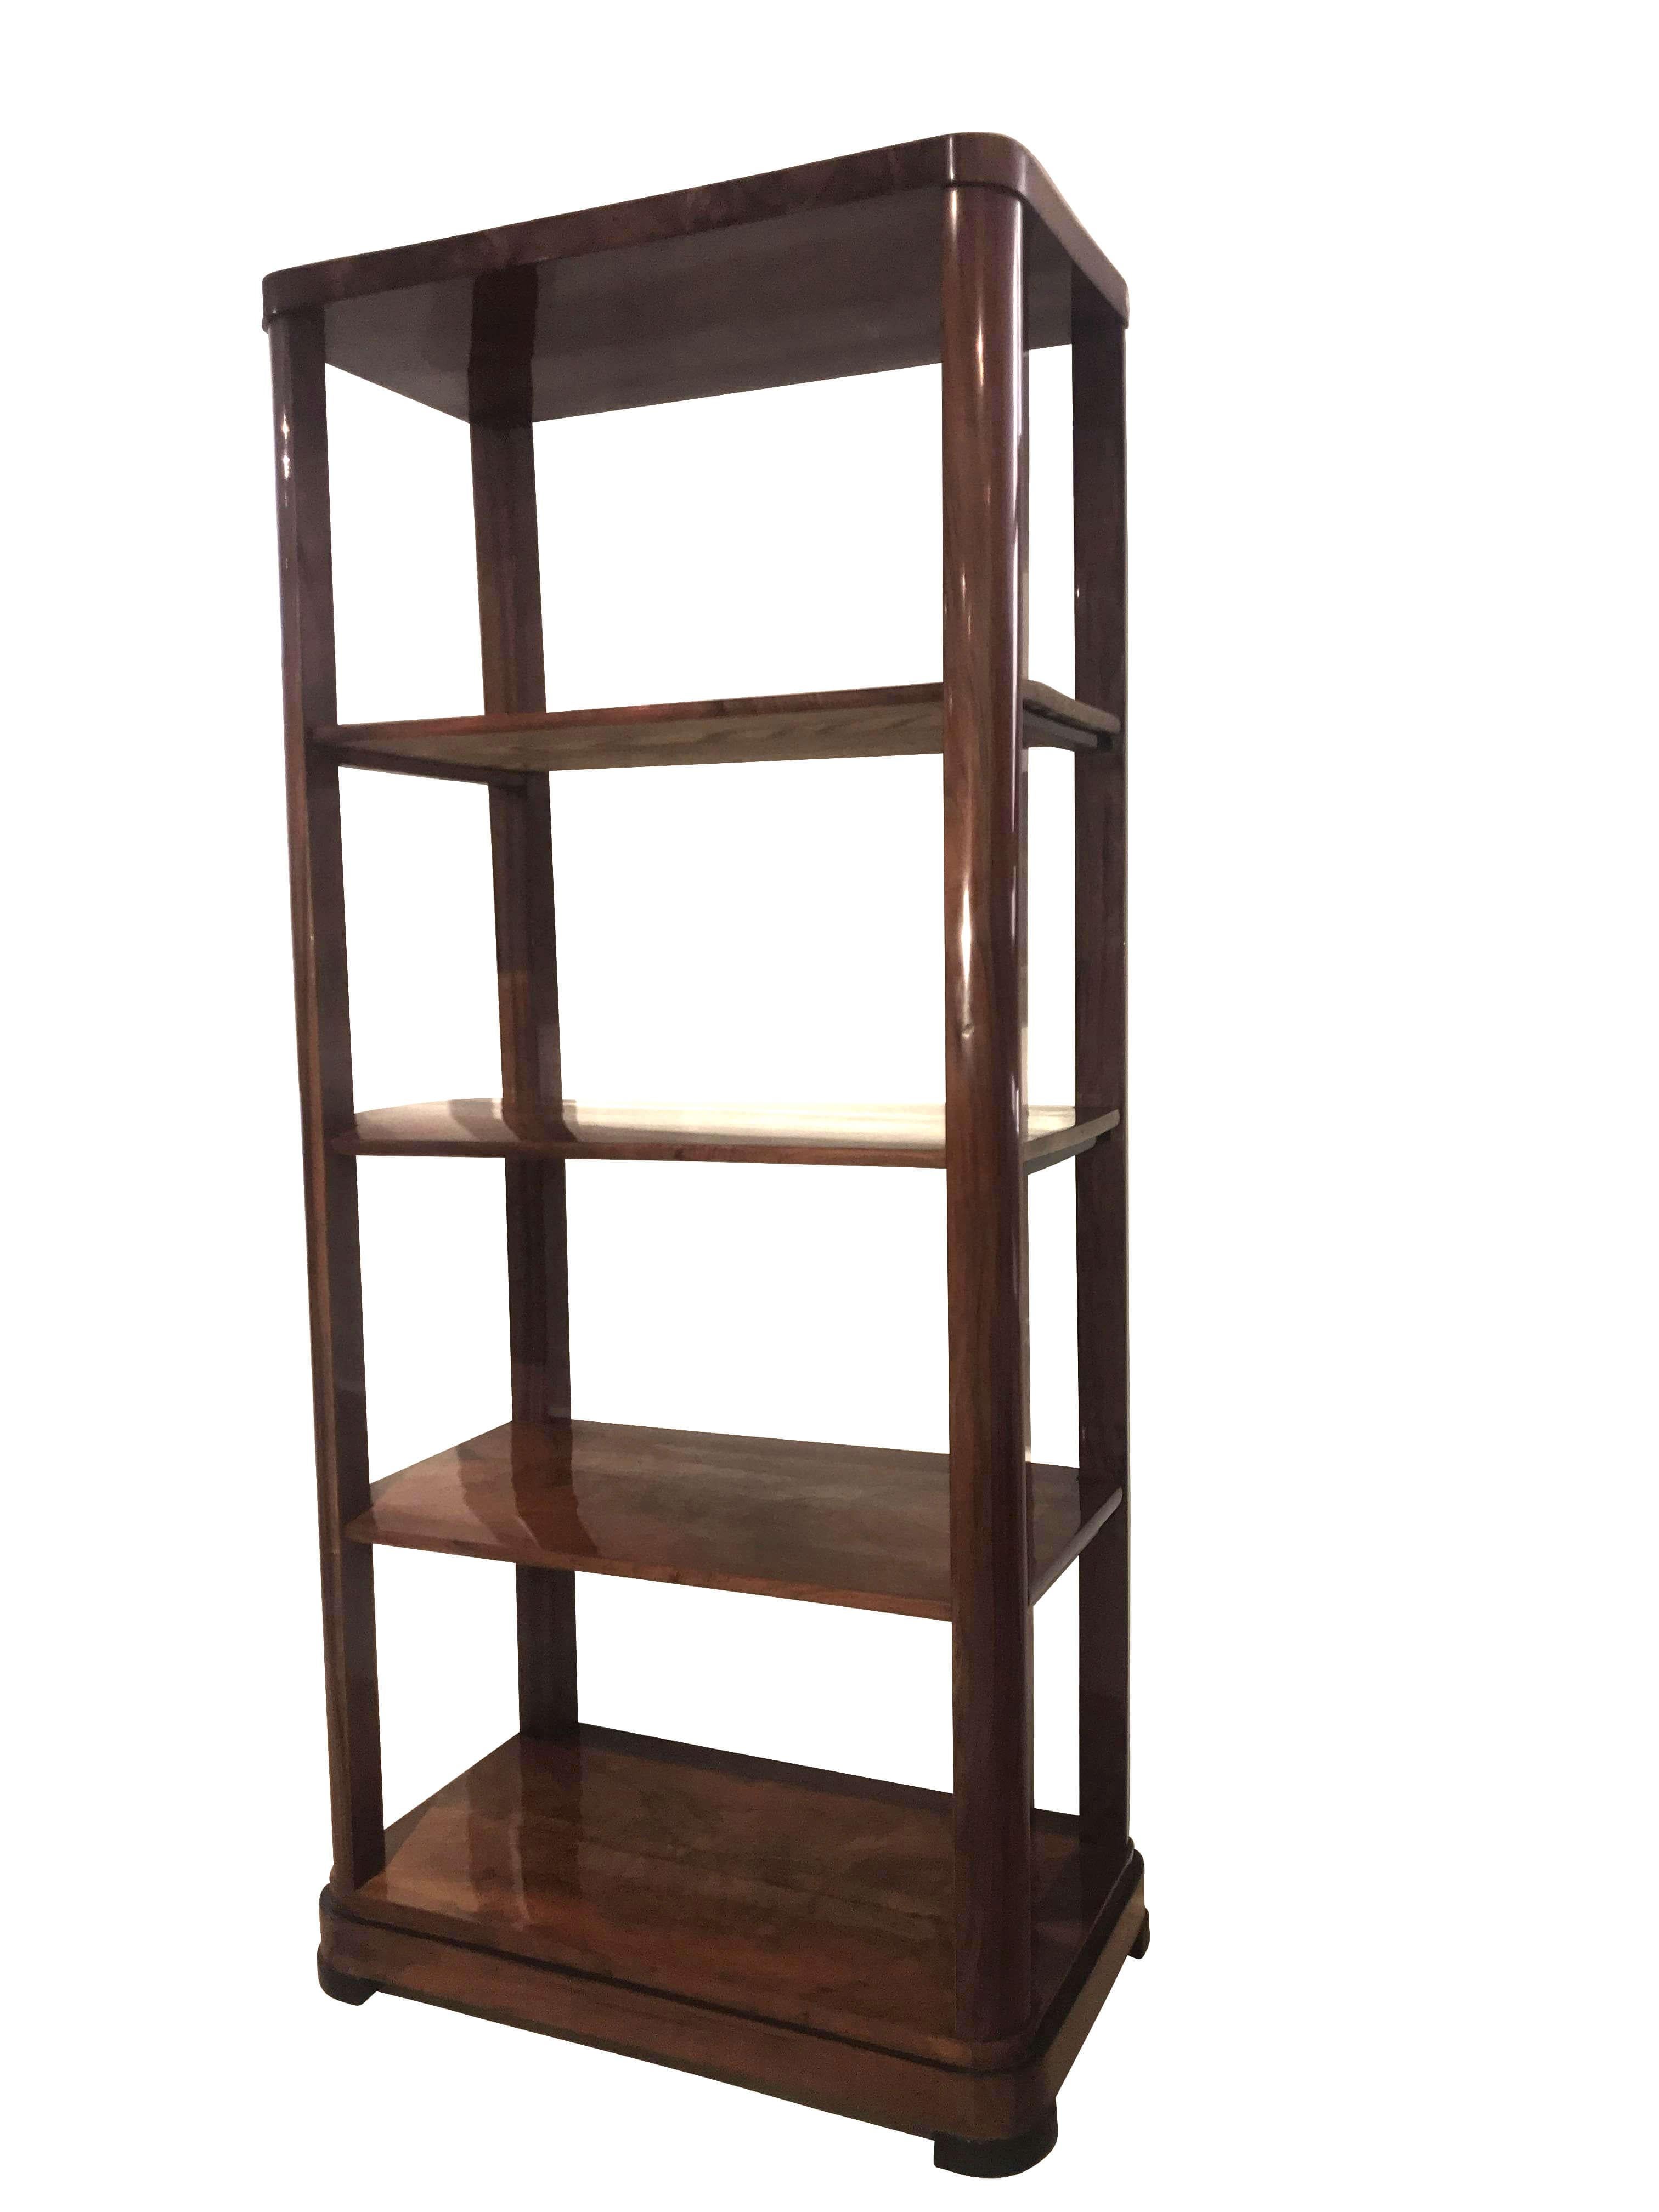 Very rare, original open Biedermeier Etagere / Shelf / Cupboard from Vienna, Austria around 1830. 

Excellently restored and hand-polished with shellac (French Polish). 
The Etagere has five plates / compartments with each made of a superb walnut